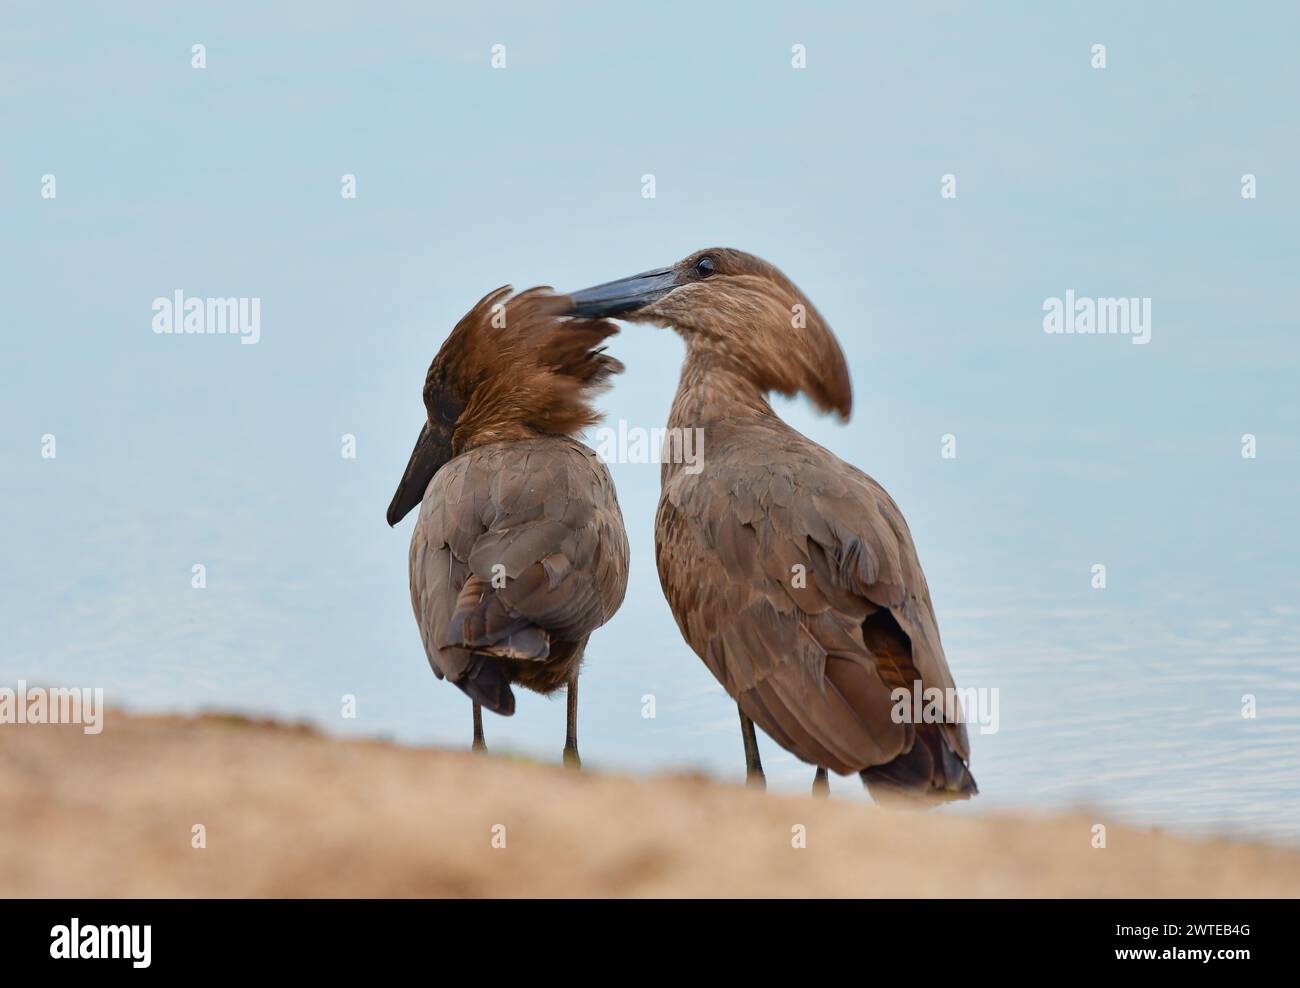 Two Hammerkops (Scopus umbretta) in mating season. The male bird is preening the feather of the female after mating. Lake Victoria, Uganda Stock Photo